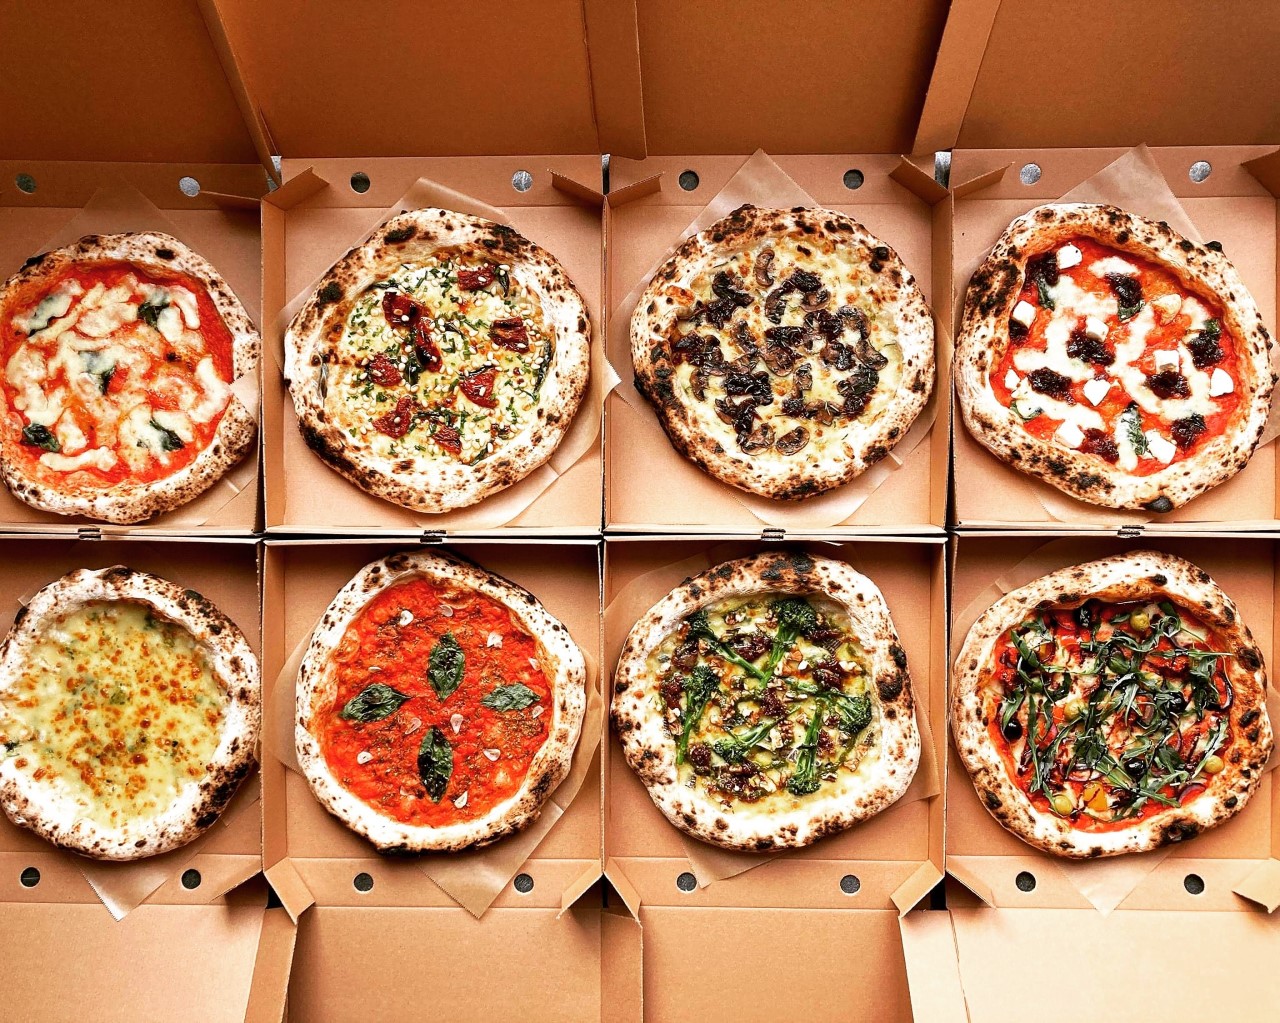 Slow Rise's amazing array of pizzas